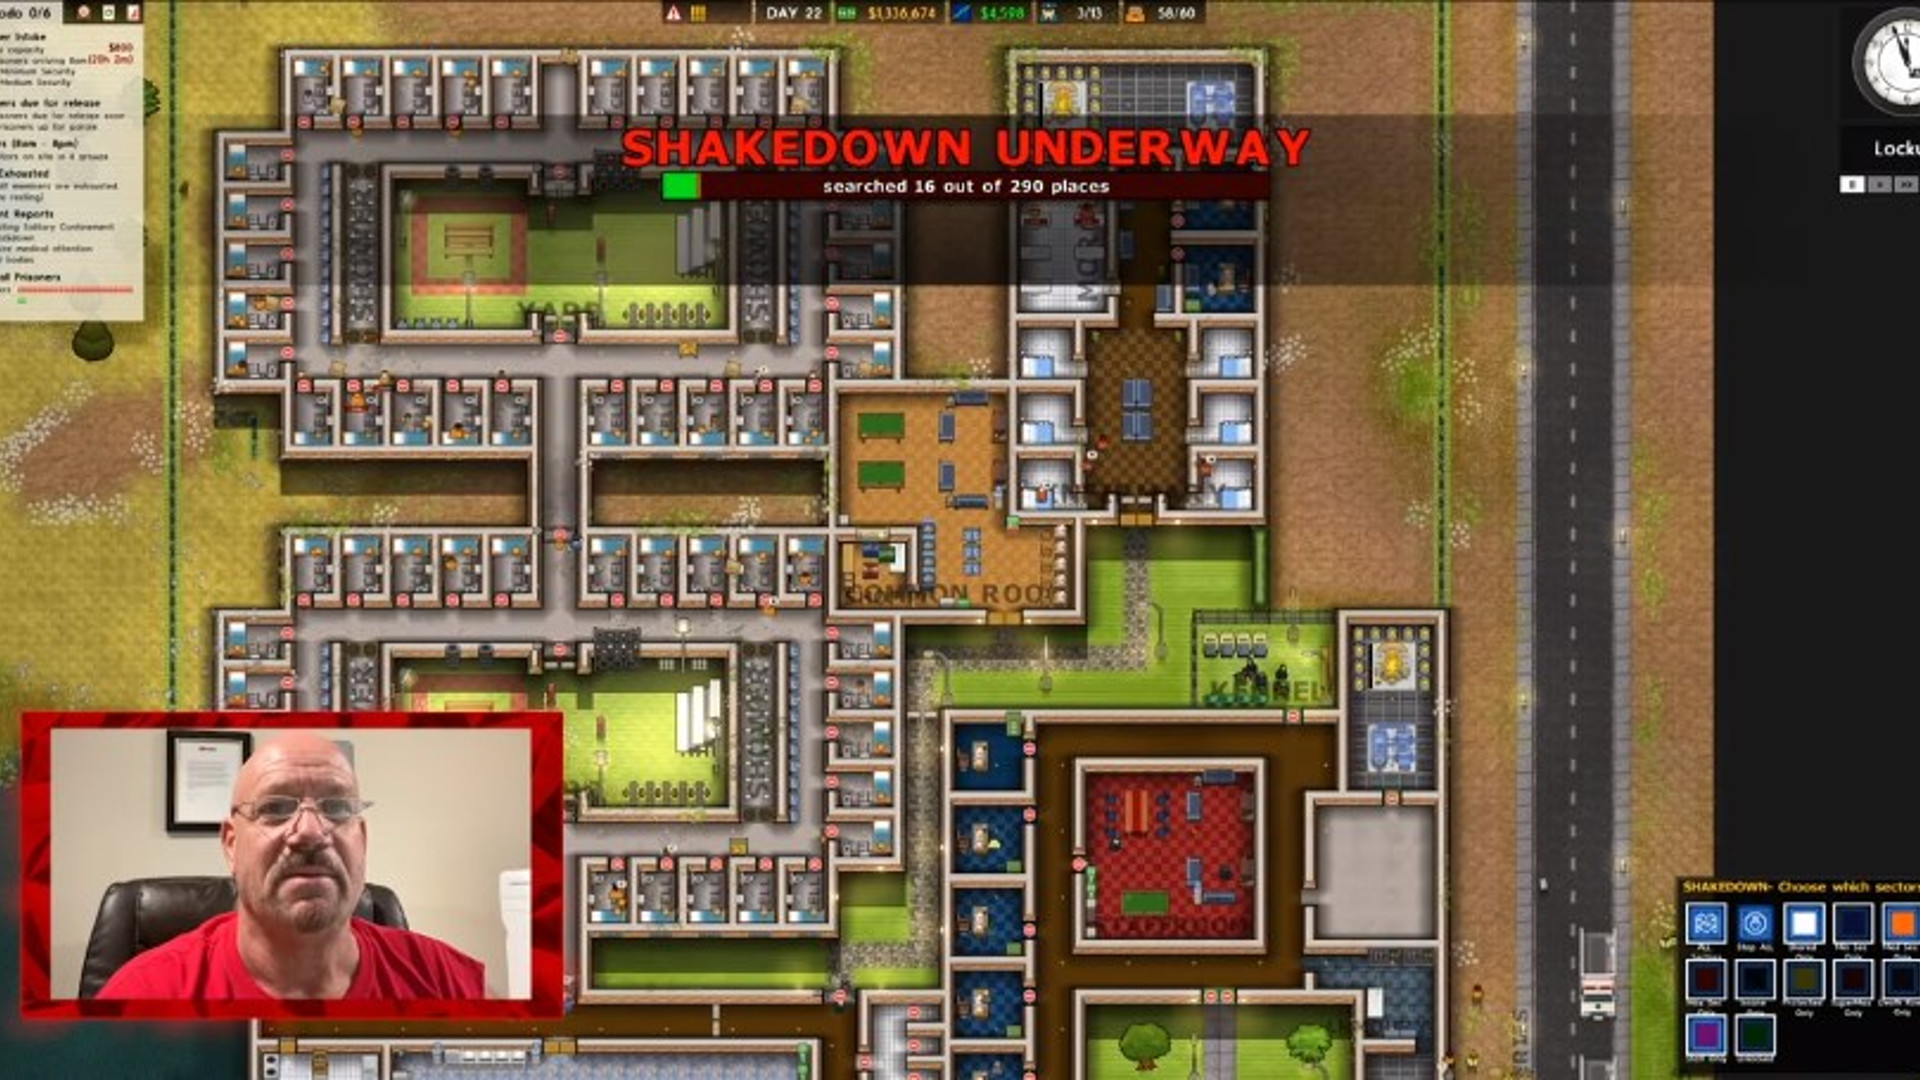 8. "Prison Architect" fan art: Inmate with blue hair - wide 6